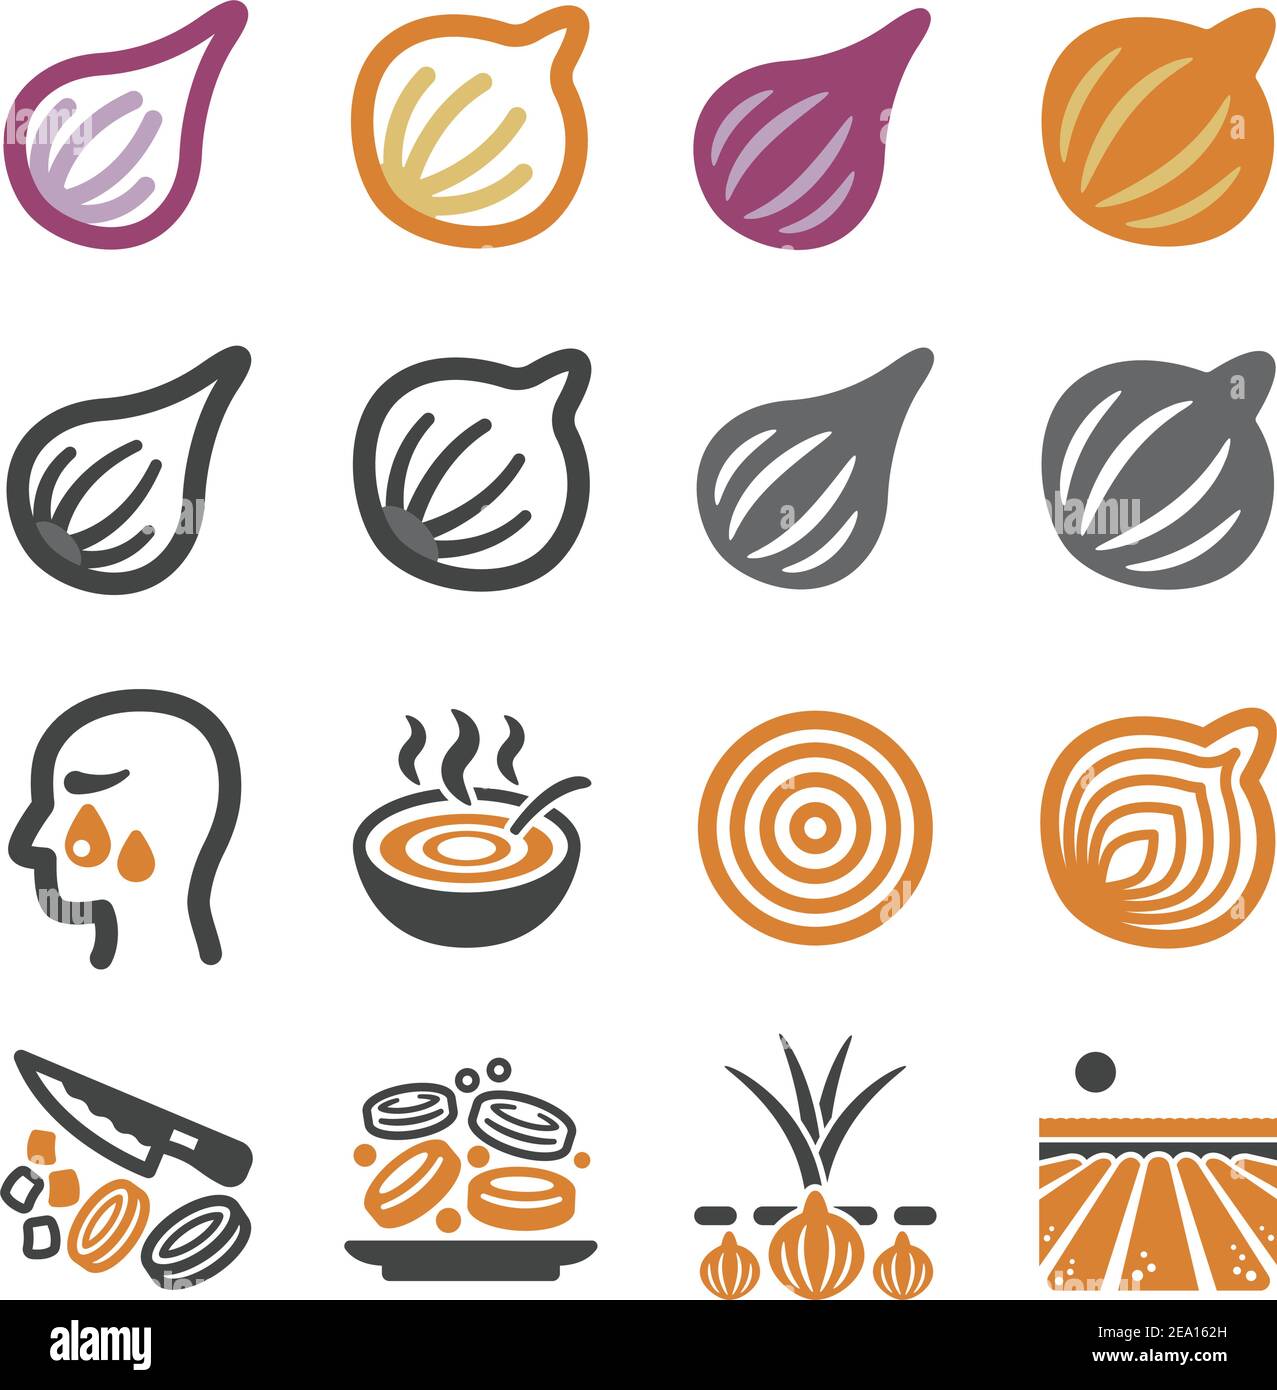 onion,shallot icon set,vector and illustration Stock Vector